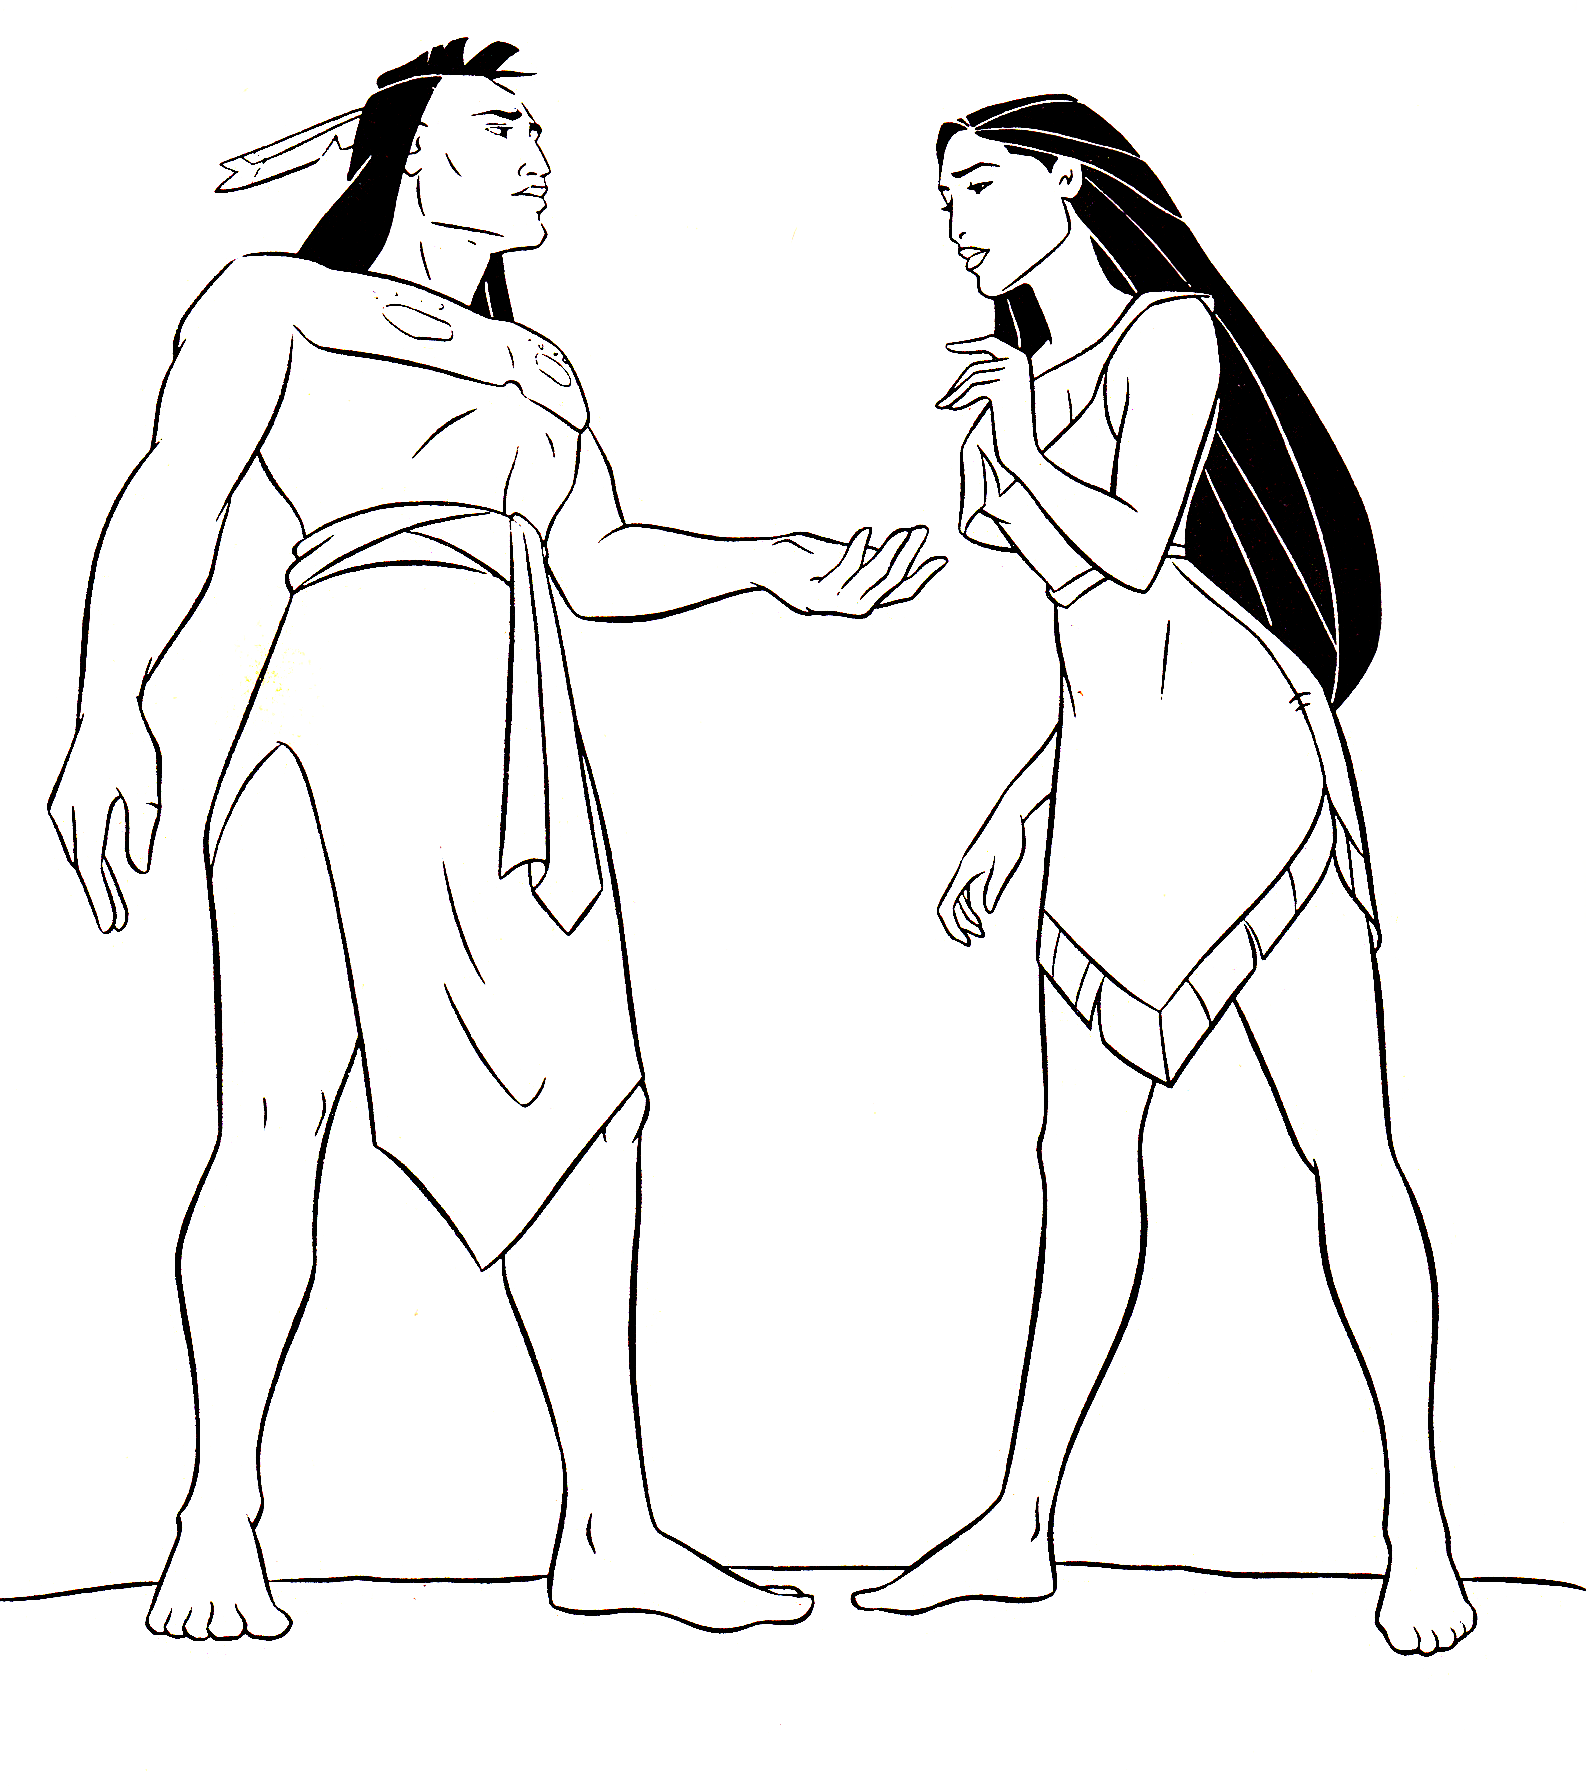 Kocoum Pocahontas Character Coloring Page